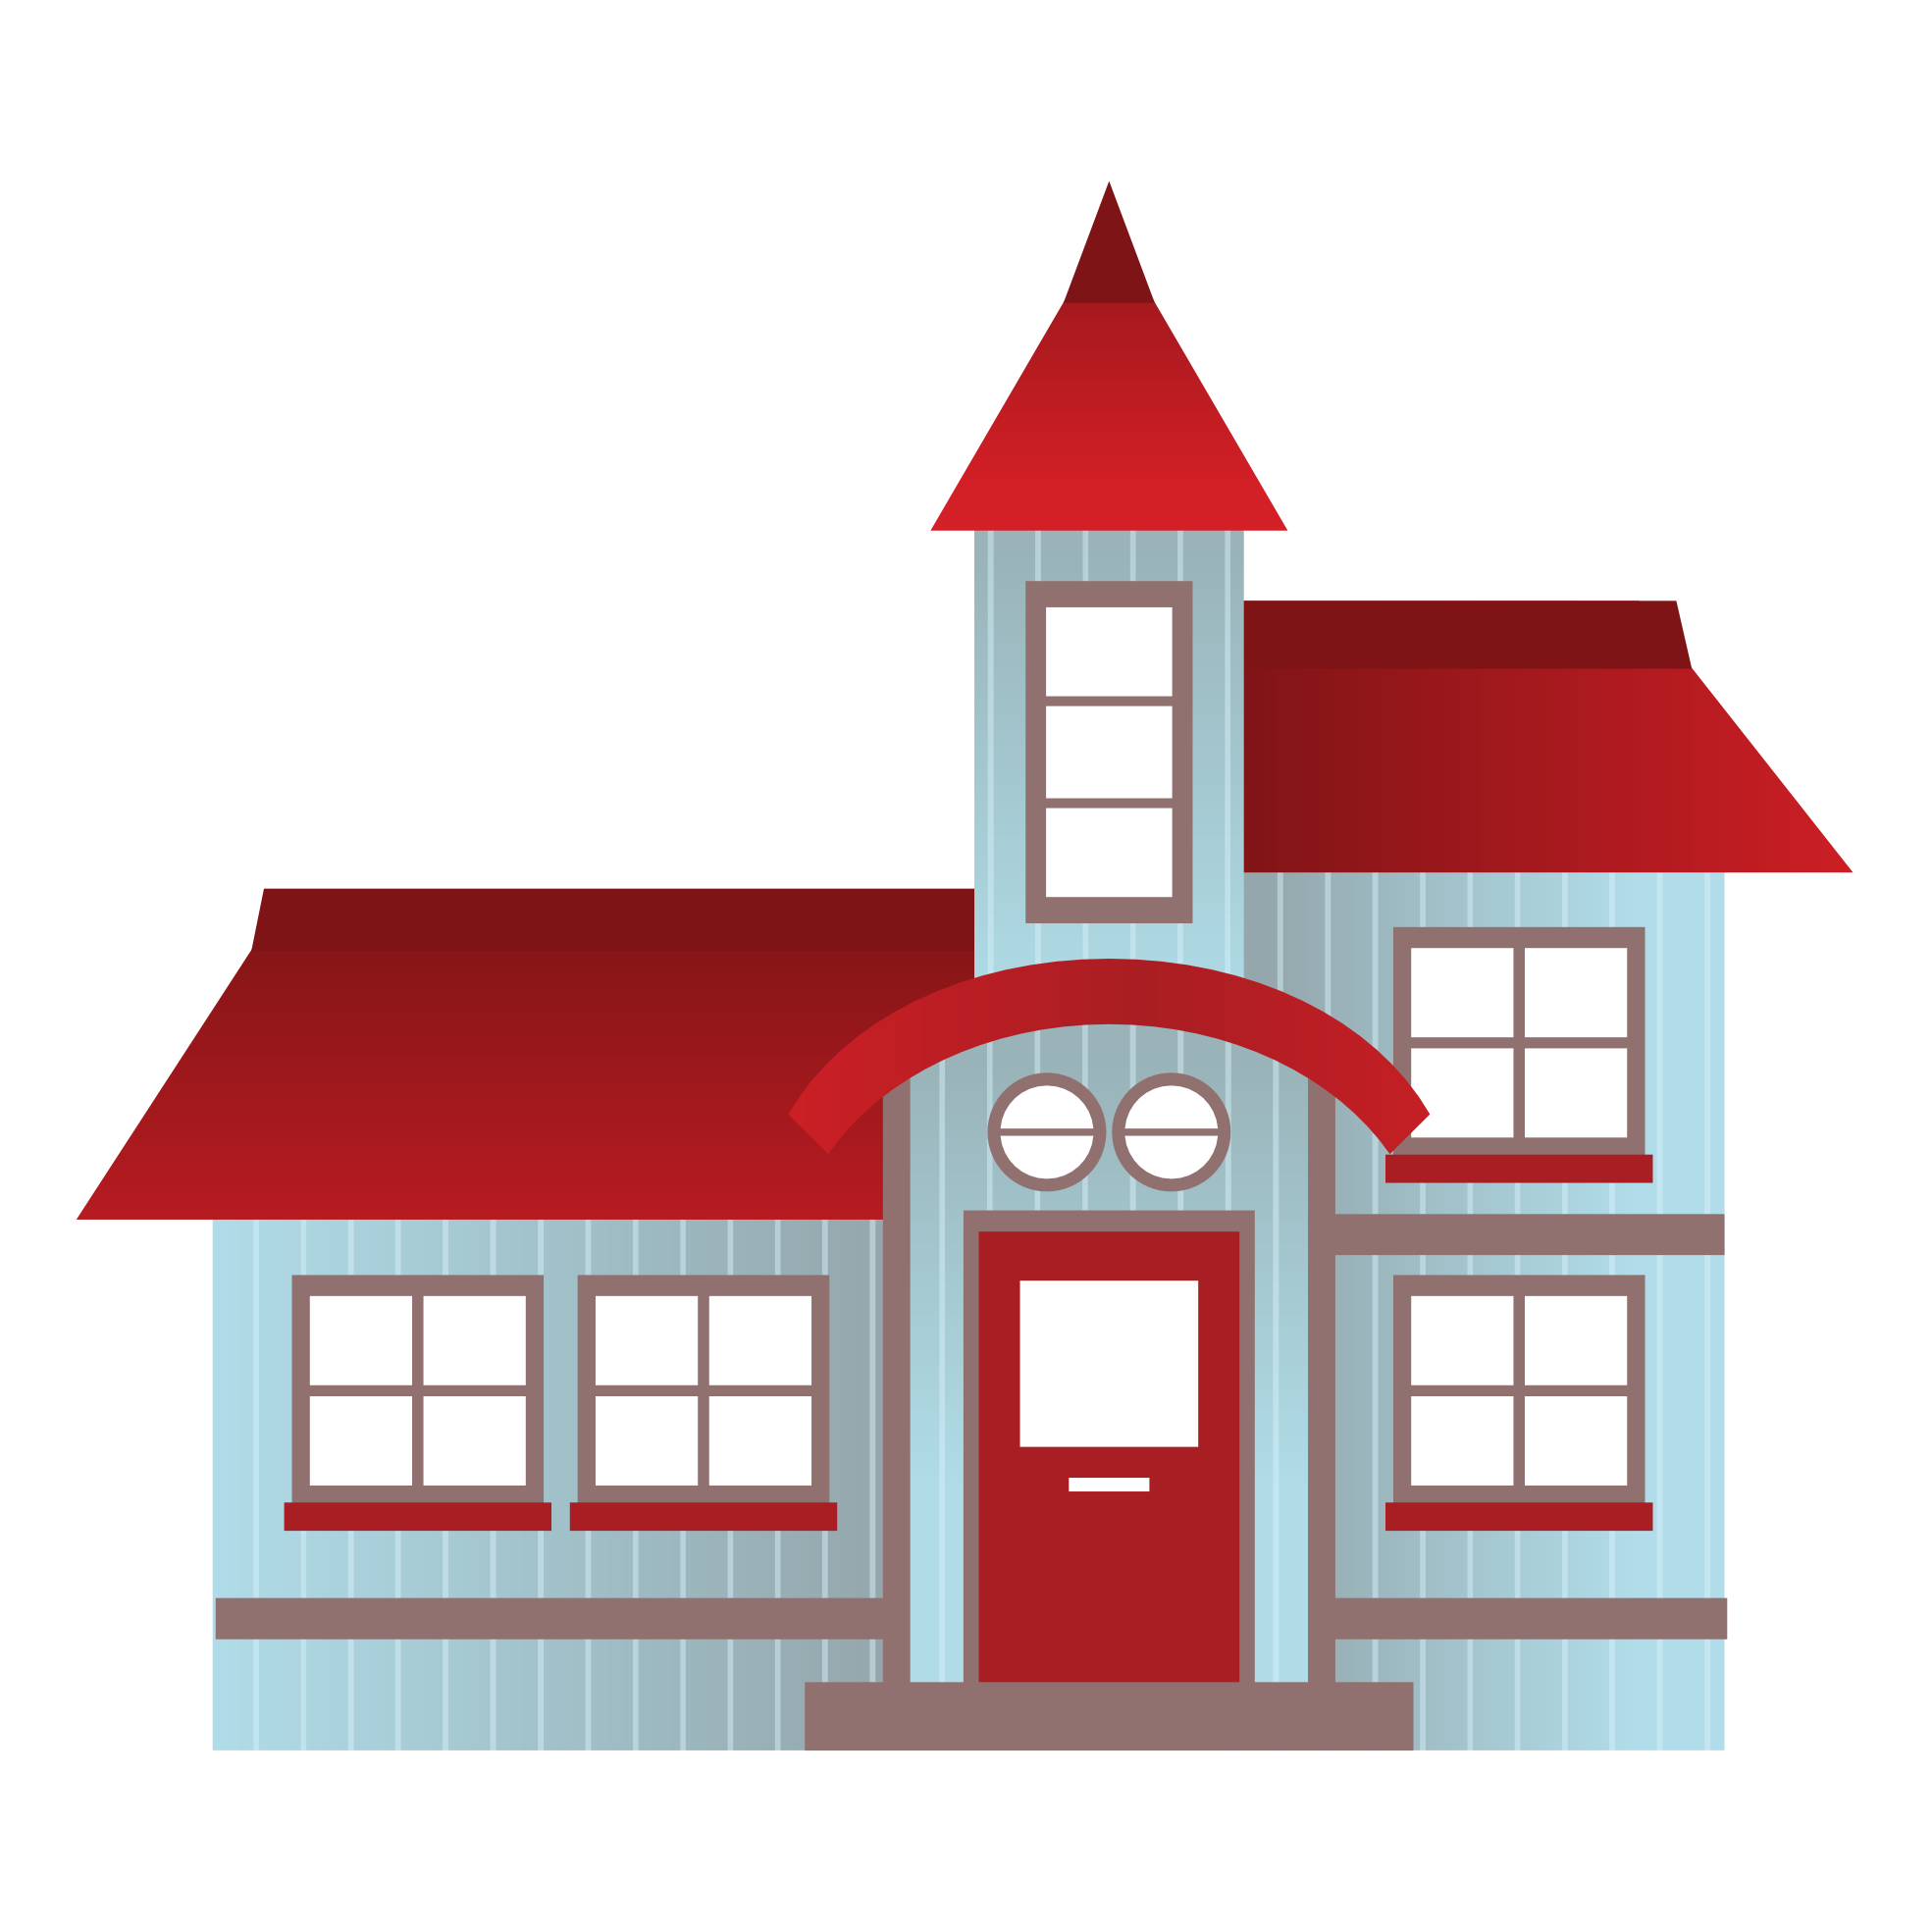 free vector house clipart - photo #36